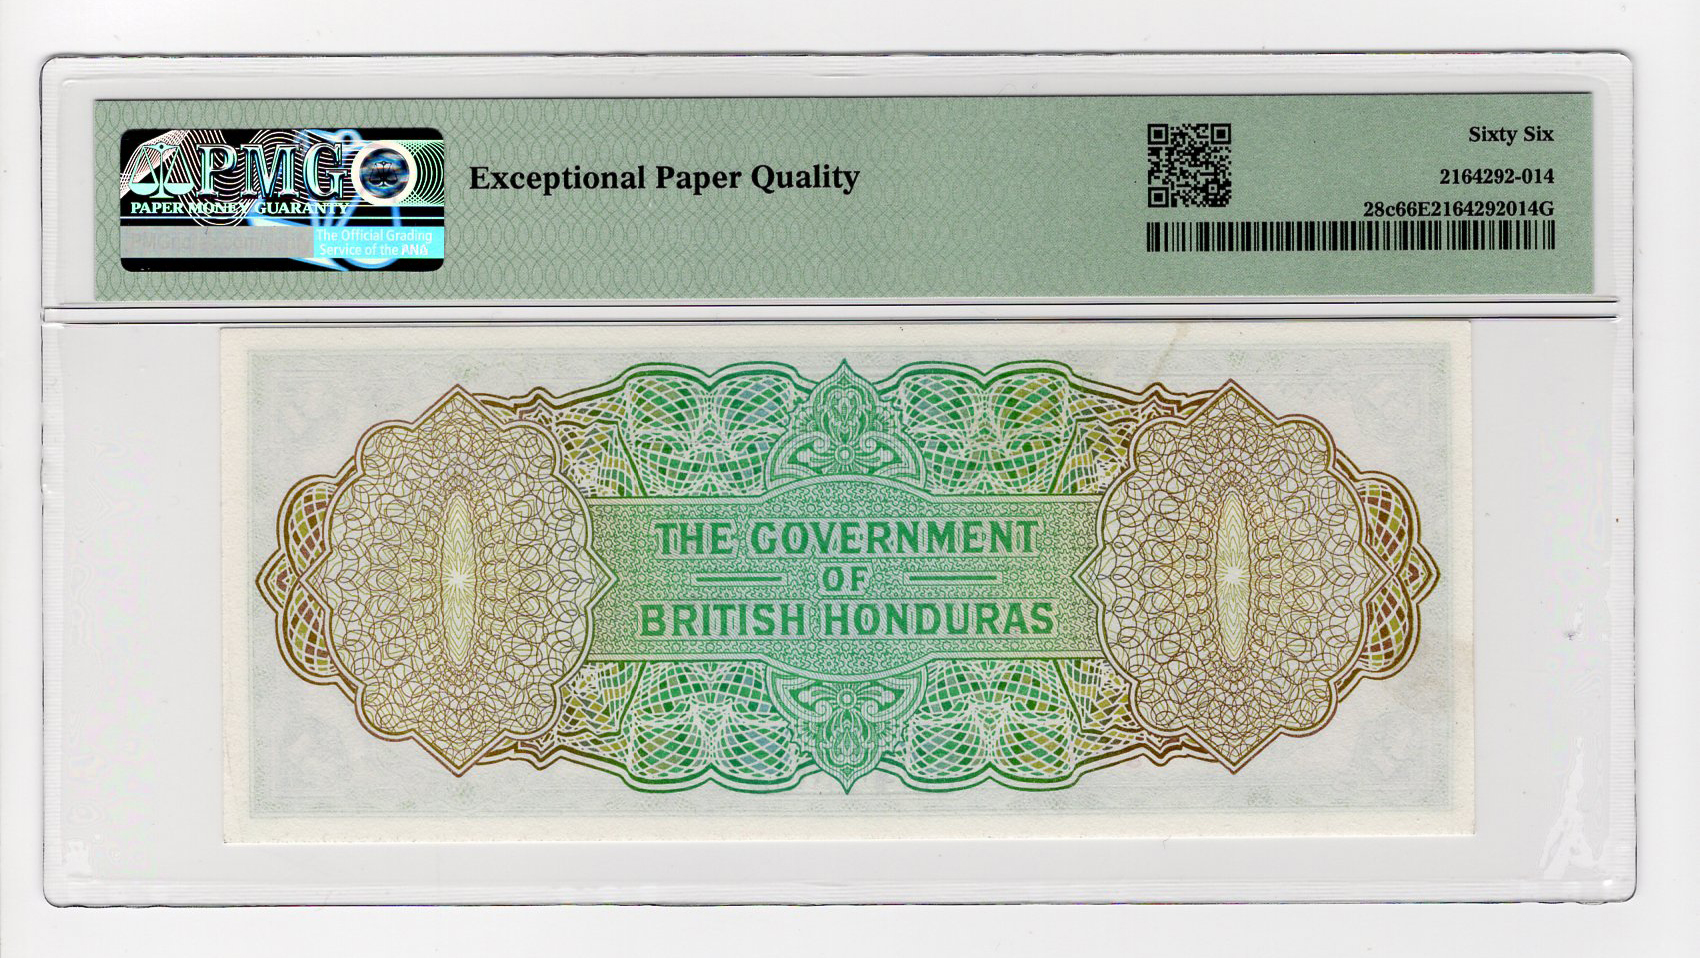 British Honduras 2 Dollars dated 1st January 1973, last date of issue, serial G/6 839030 (TBB B128a, - Image 2 of 2